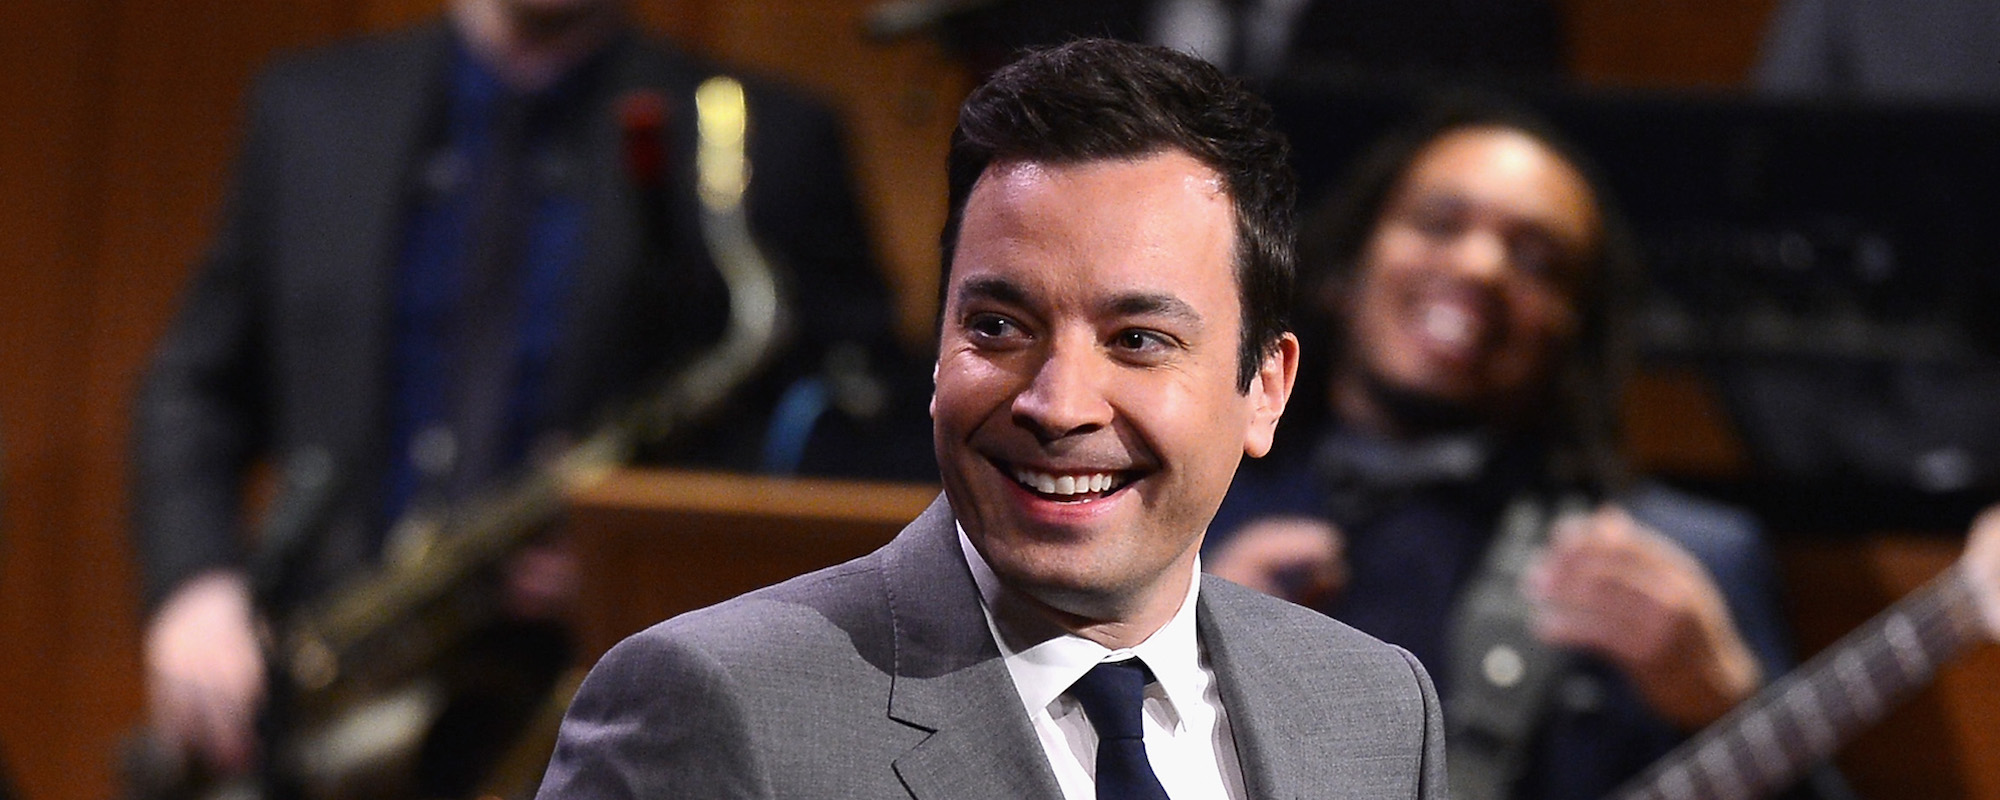 7 Songs You Didn’t Know Jimmy Fallon Wrote